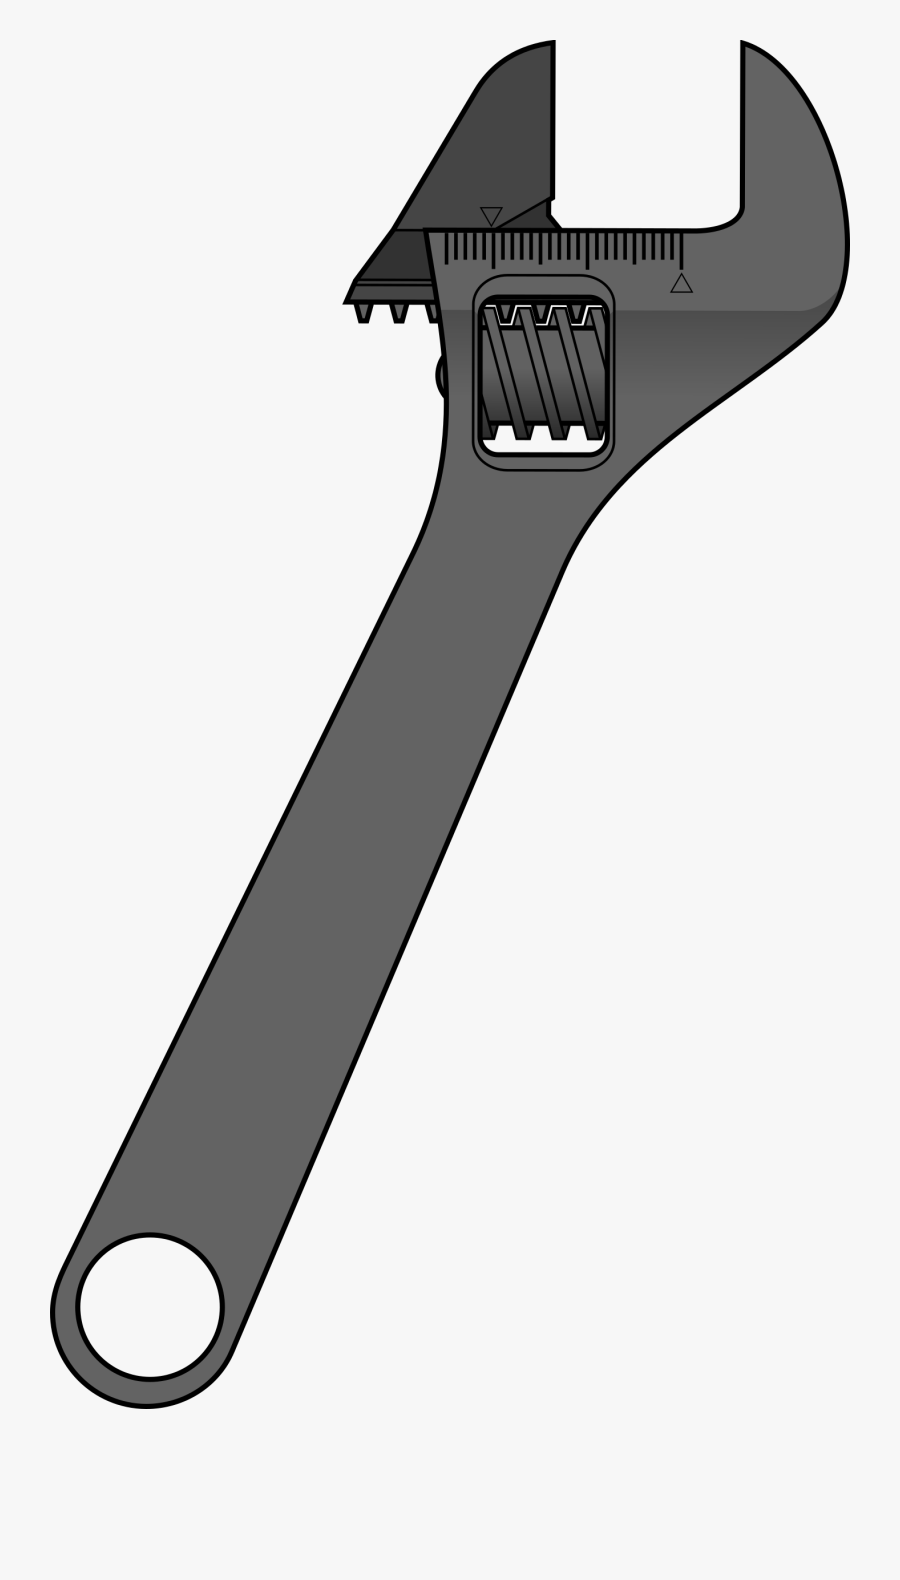 Wrench Clipart Monkey Wrench - Adjustable Wrench Clipart, Transparent Clipart